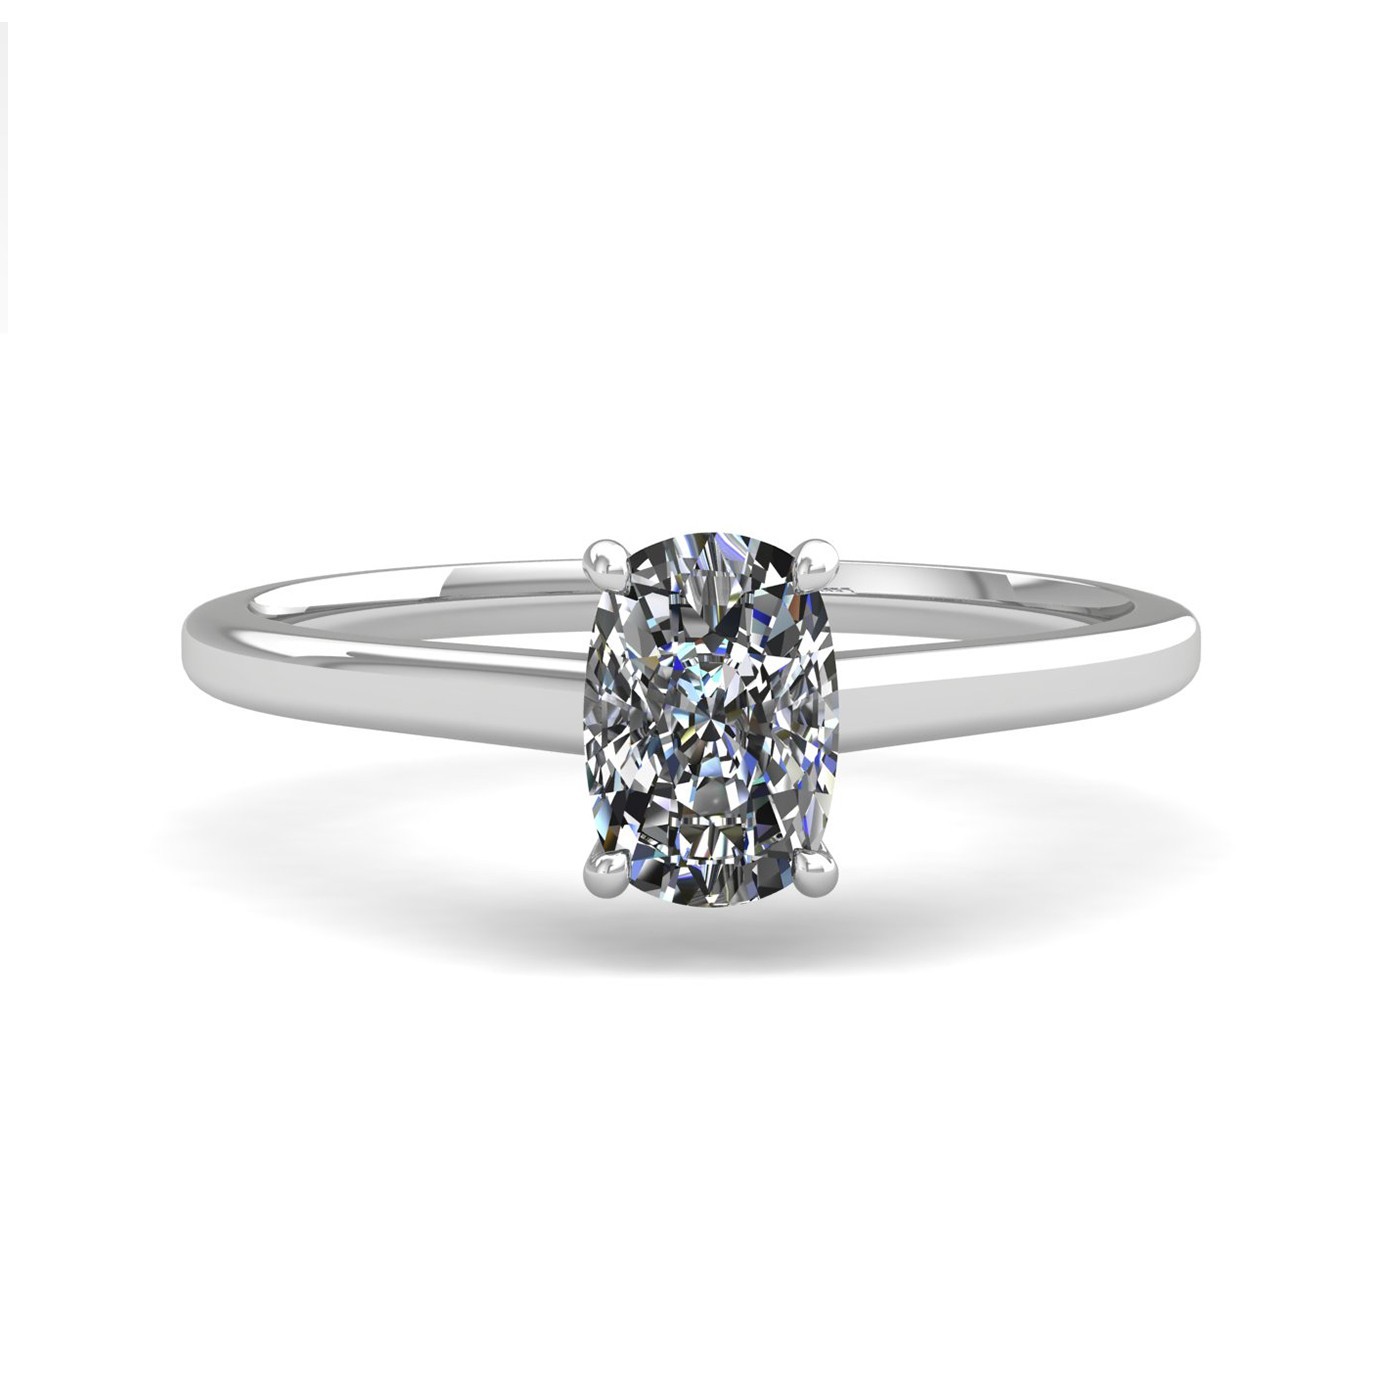 18k white gold  1.50 ct 4 prongs solitaire elongated cushion cut diamond engagement ring with whisper thin band Photos & images